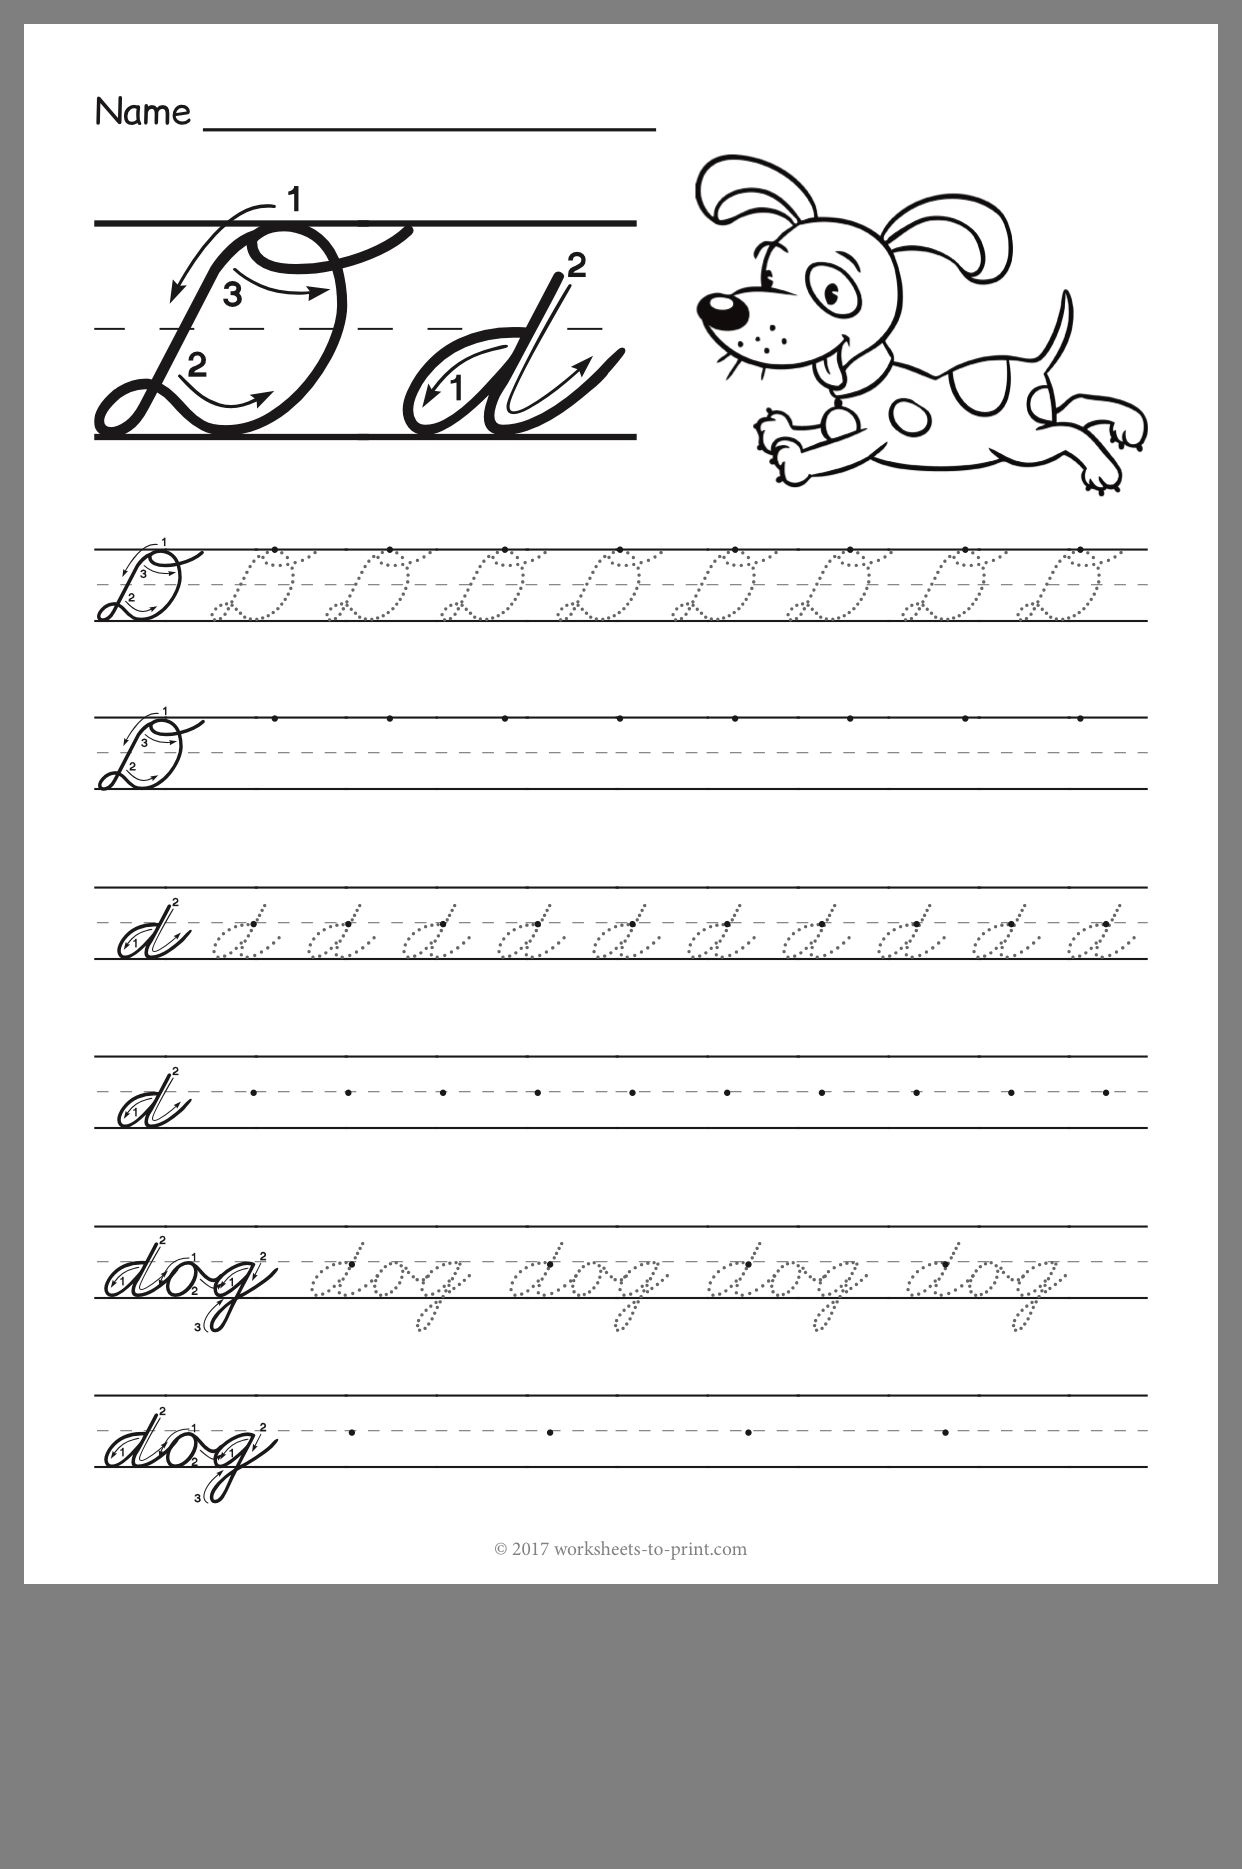 Pin By Christina Rynes On Learning Kids Handwriting Practice 